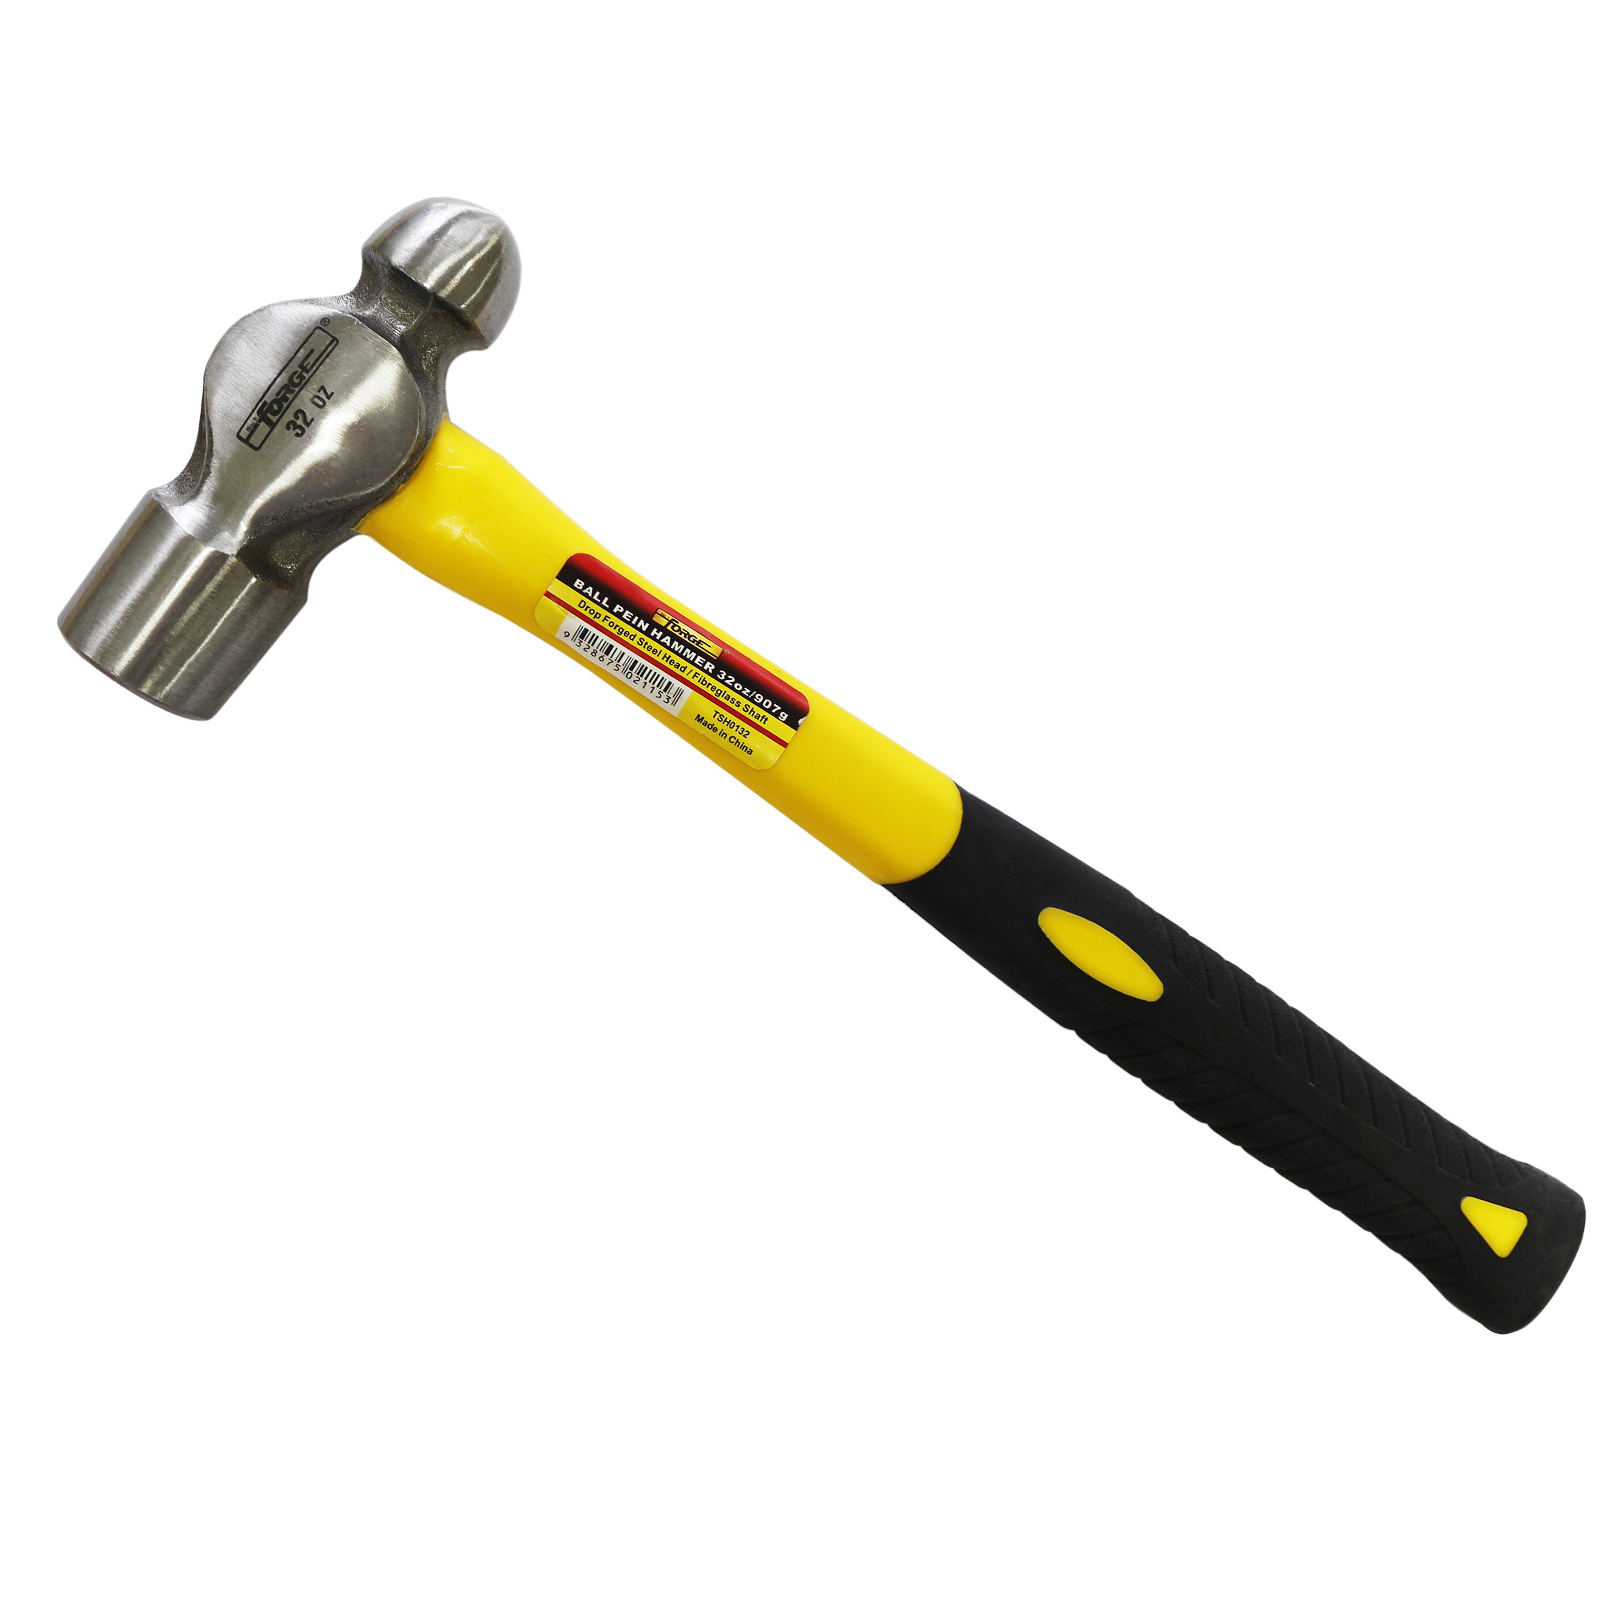 32oz Forged Carbon Steel Ball Pein Hammer with Fiberglass Handle